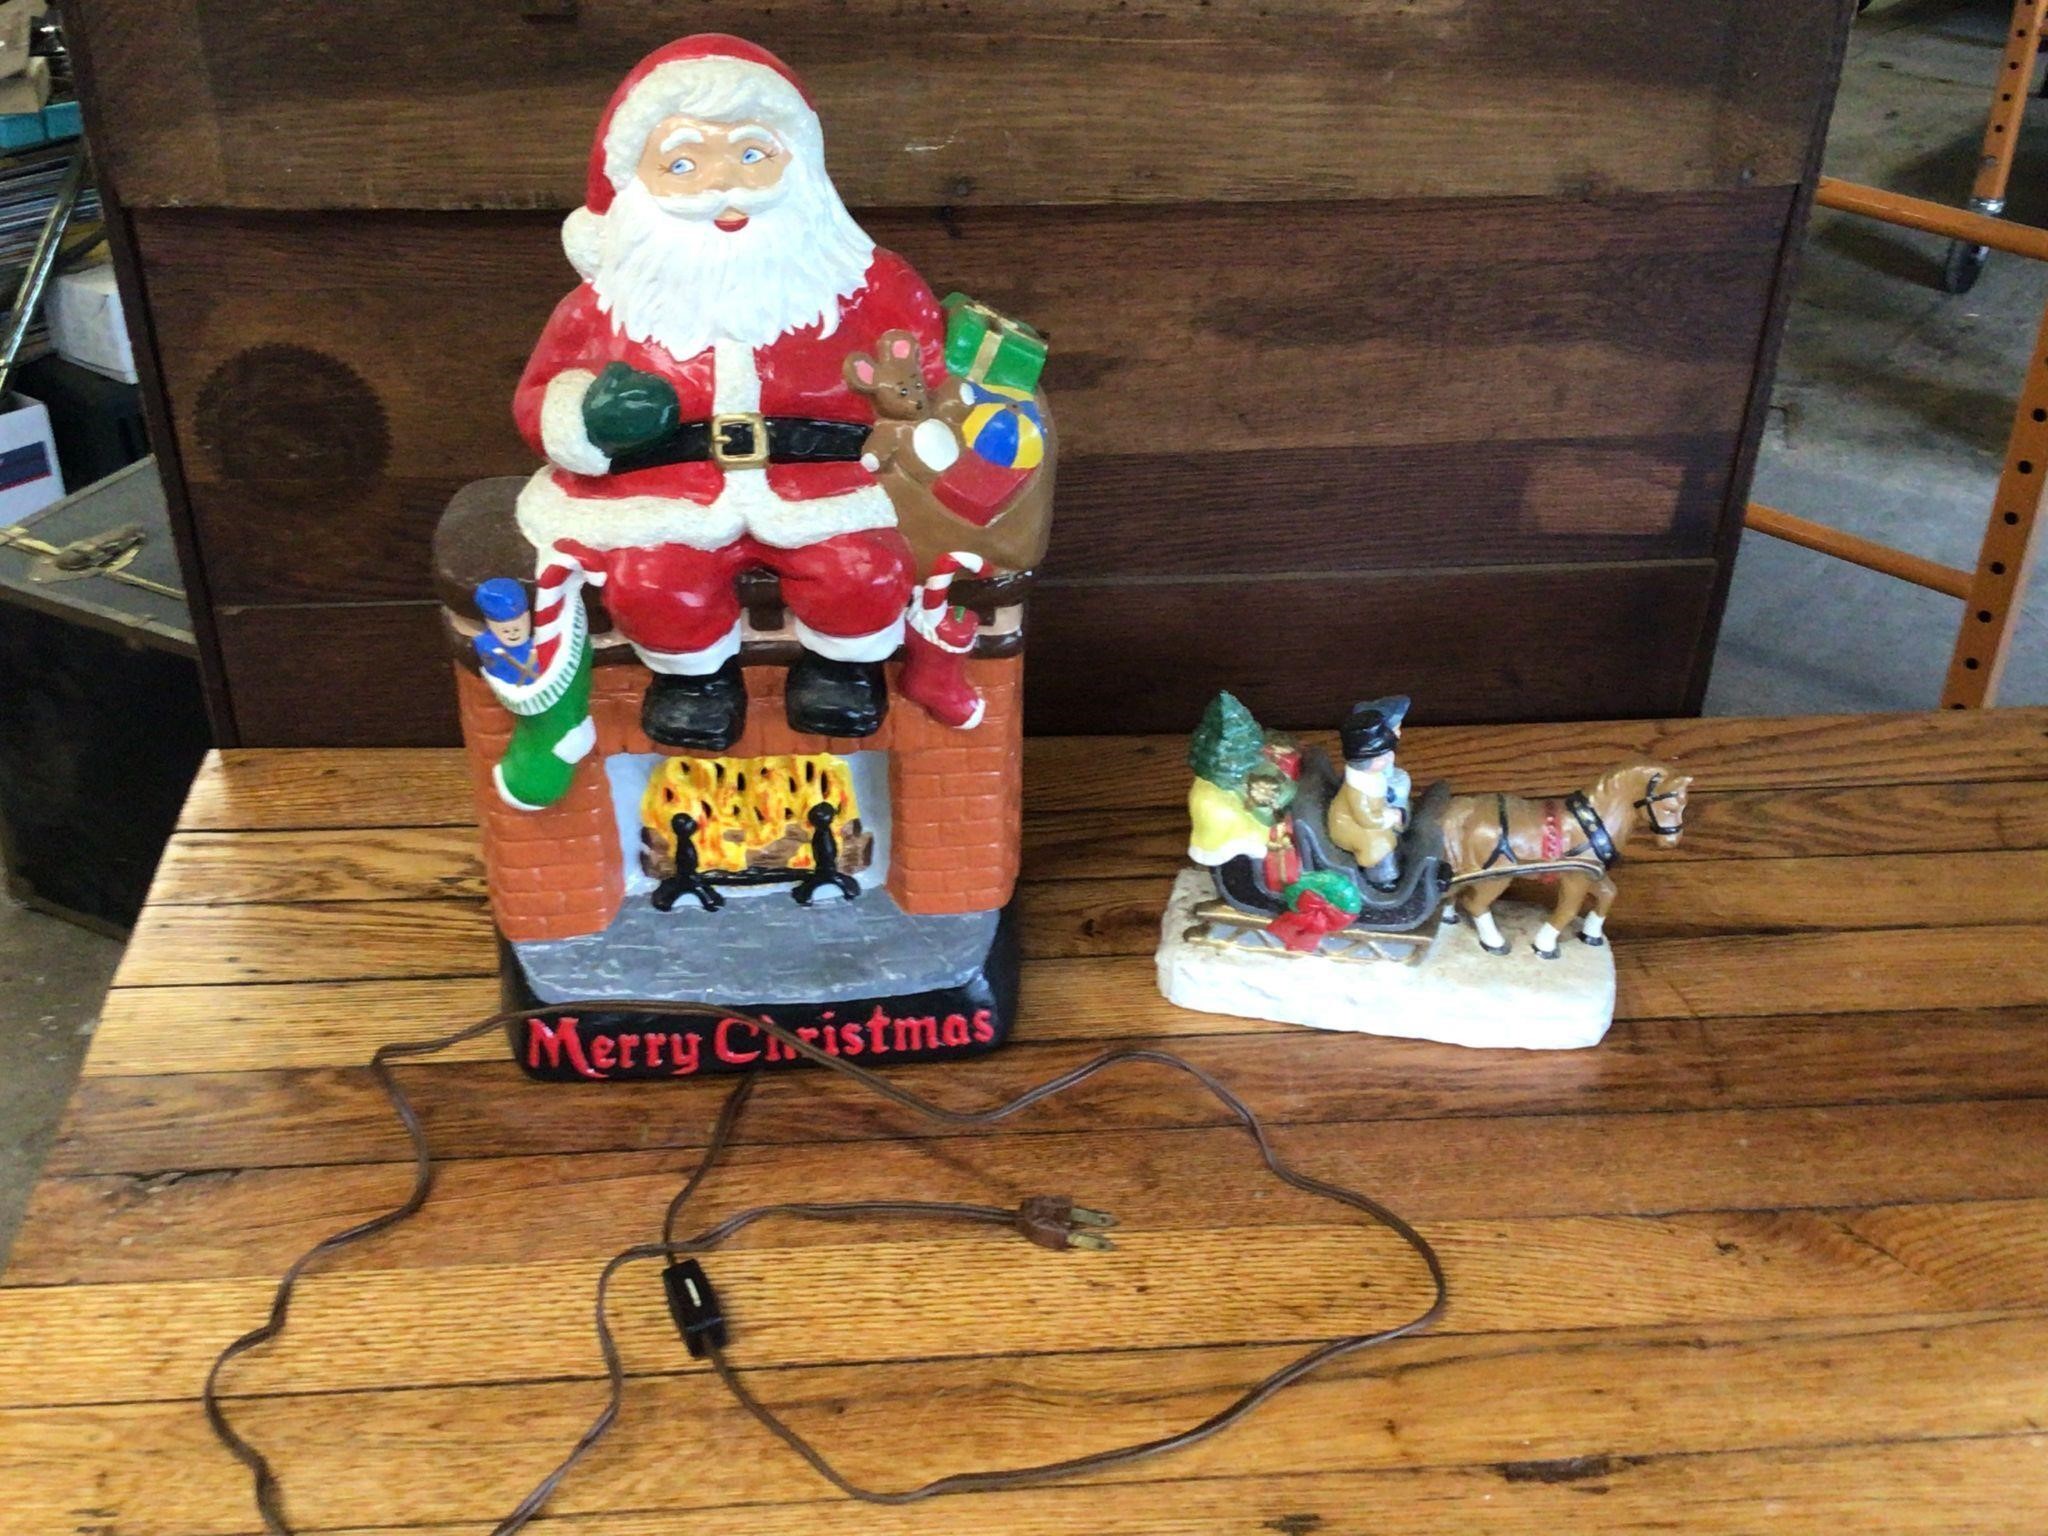 VINTAGE SANTA CLAUS LIGHT WITH MUSIC BOX IN IT